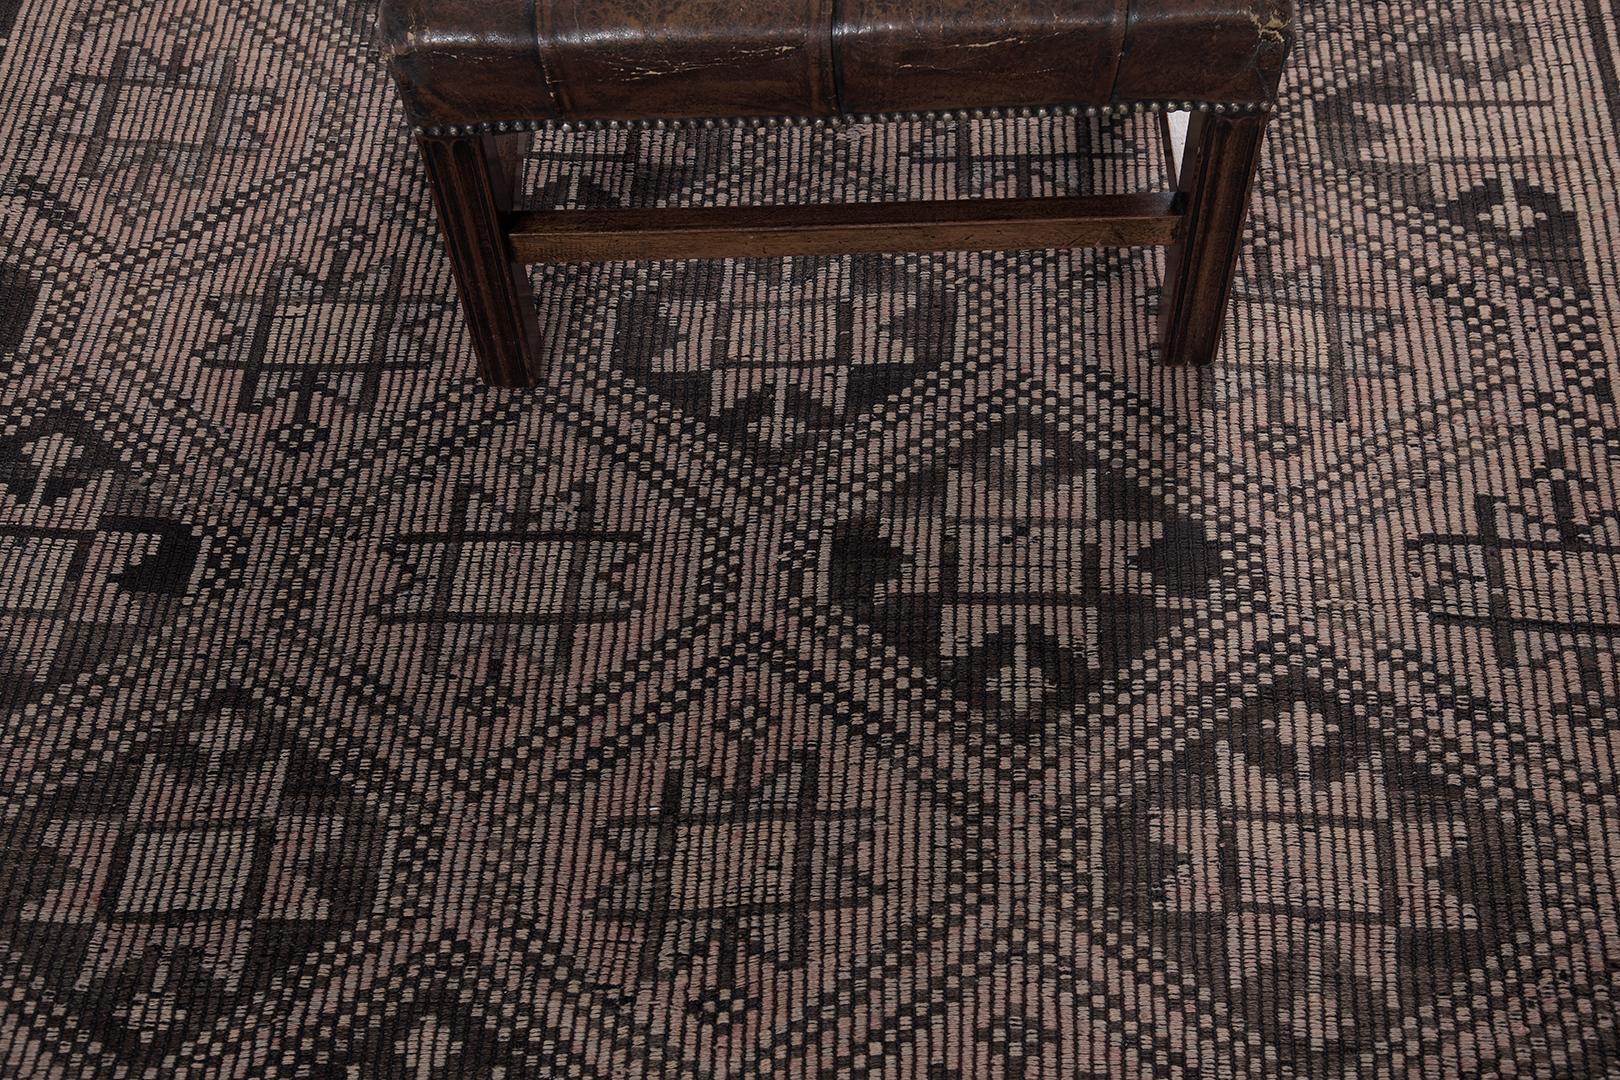 An alluring Vintage Turkish Anatolian Jejim Kilim rug that beguiles you to a panel design pattern of symbolical elements that are poised to amaze. The abrashed light cedar field is covered by eight pointed star’ motifs enclosed in a series of